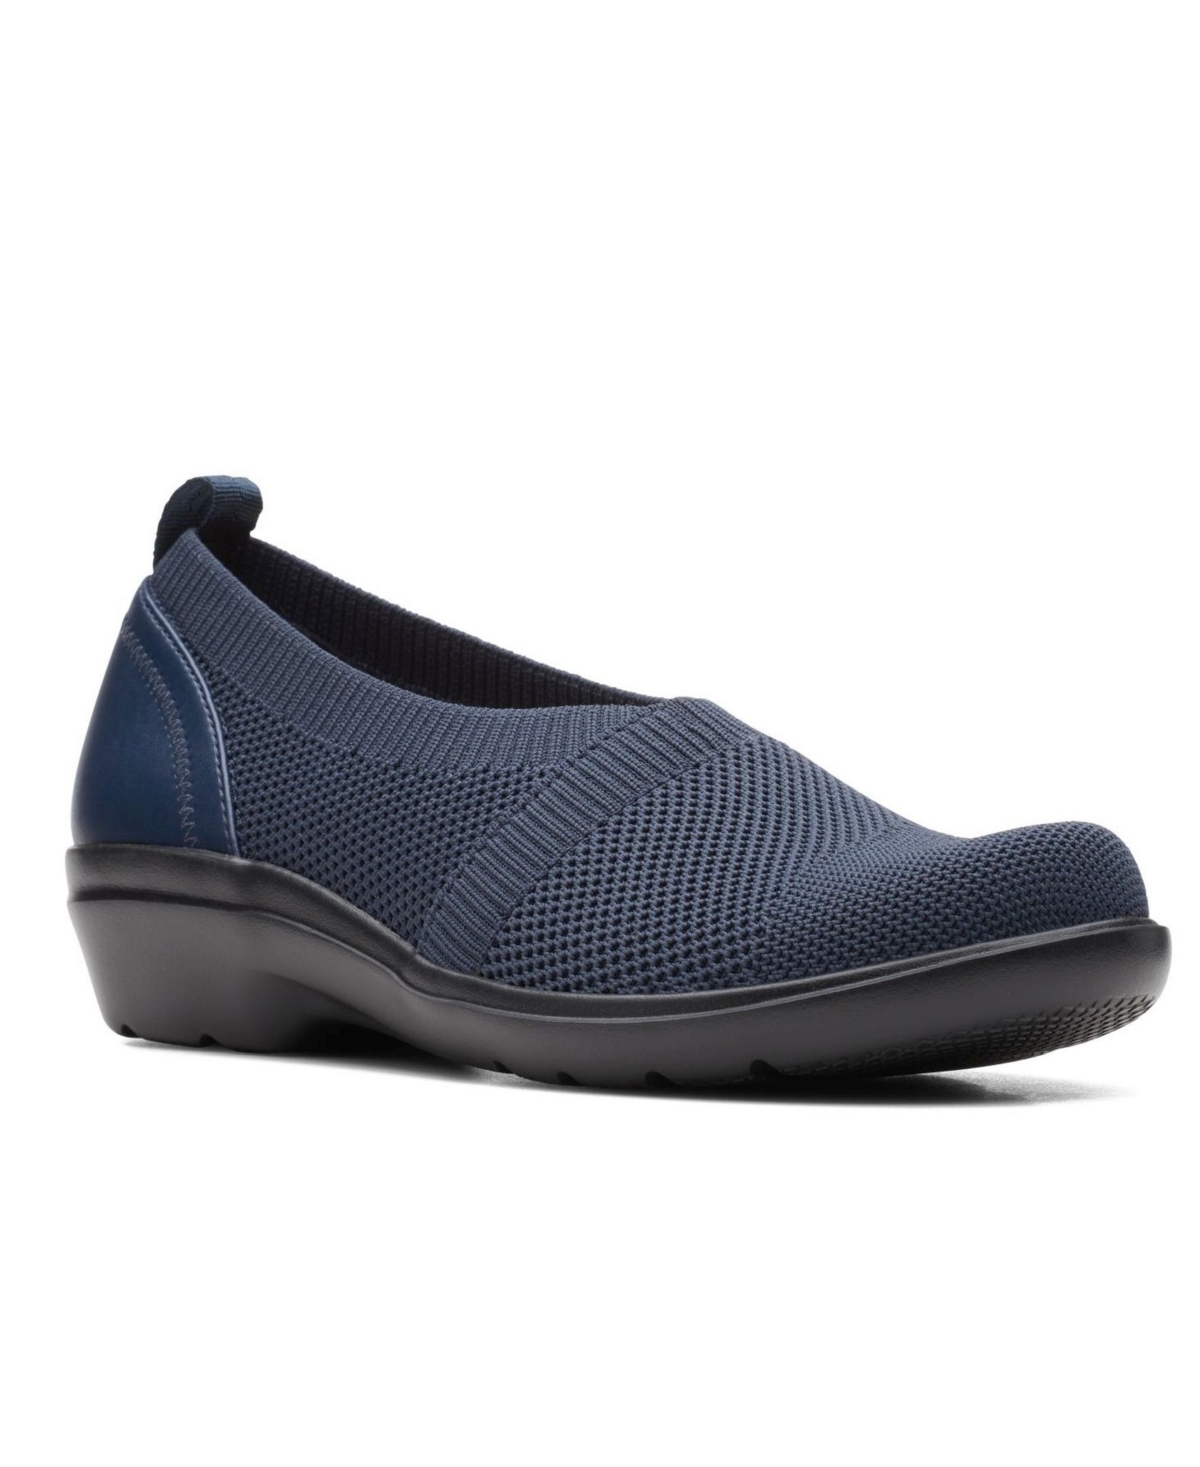 CLARKS WOMEN'S COLLECTION SASHLYNN STYLE SHOES WOMEN'S SHOES